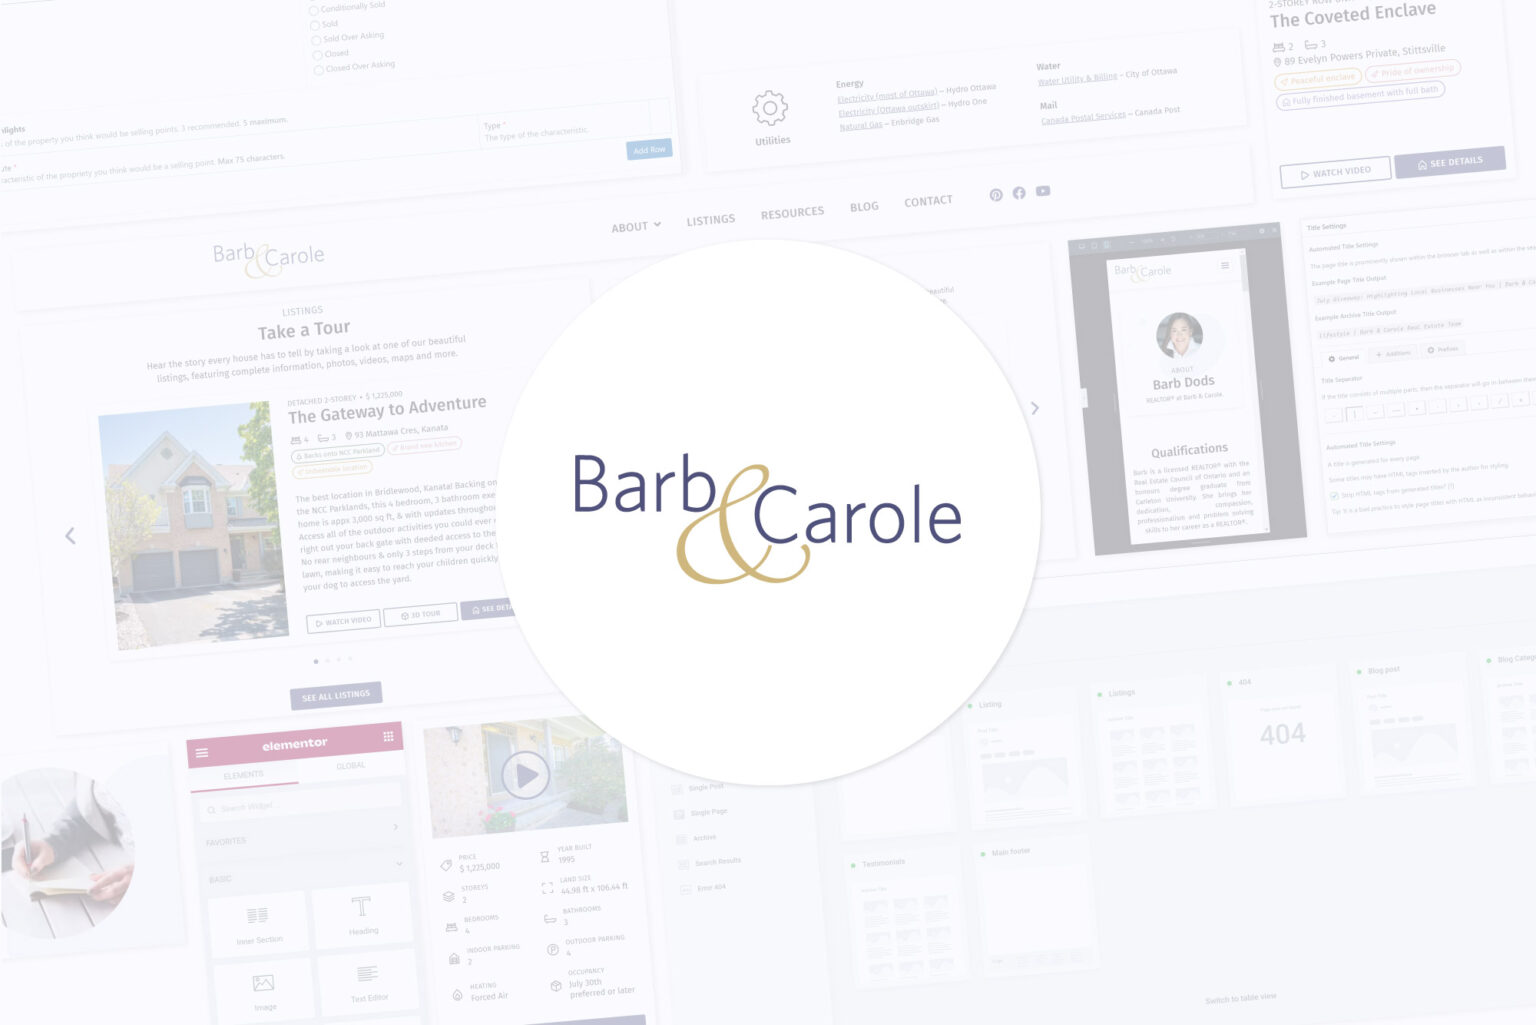 Barb & Carole's logo over screen capture of its website and interfaces the software running it.